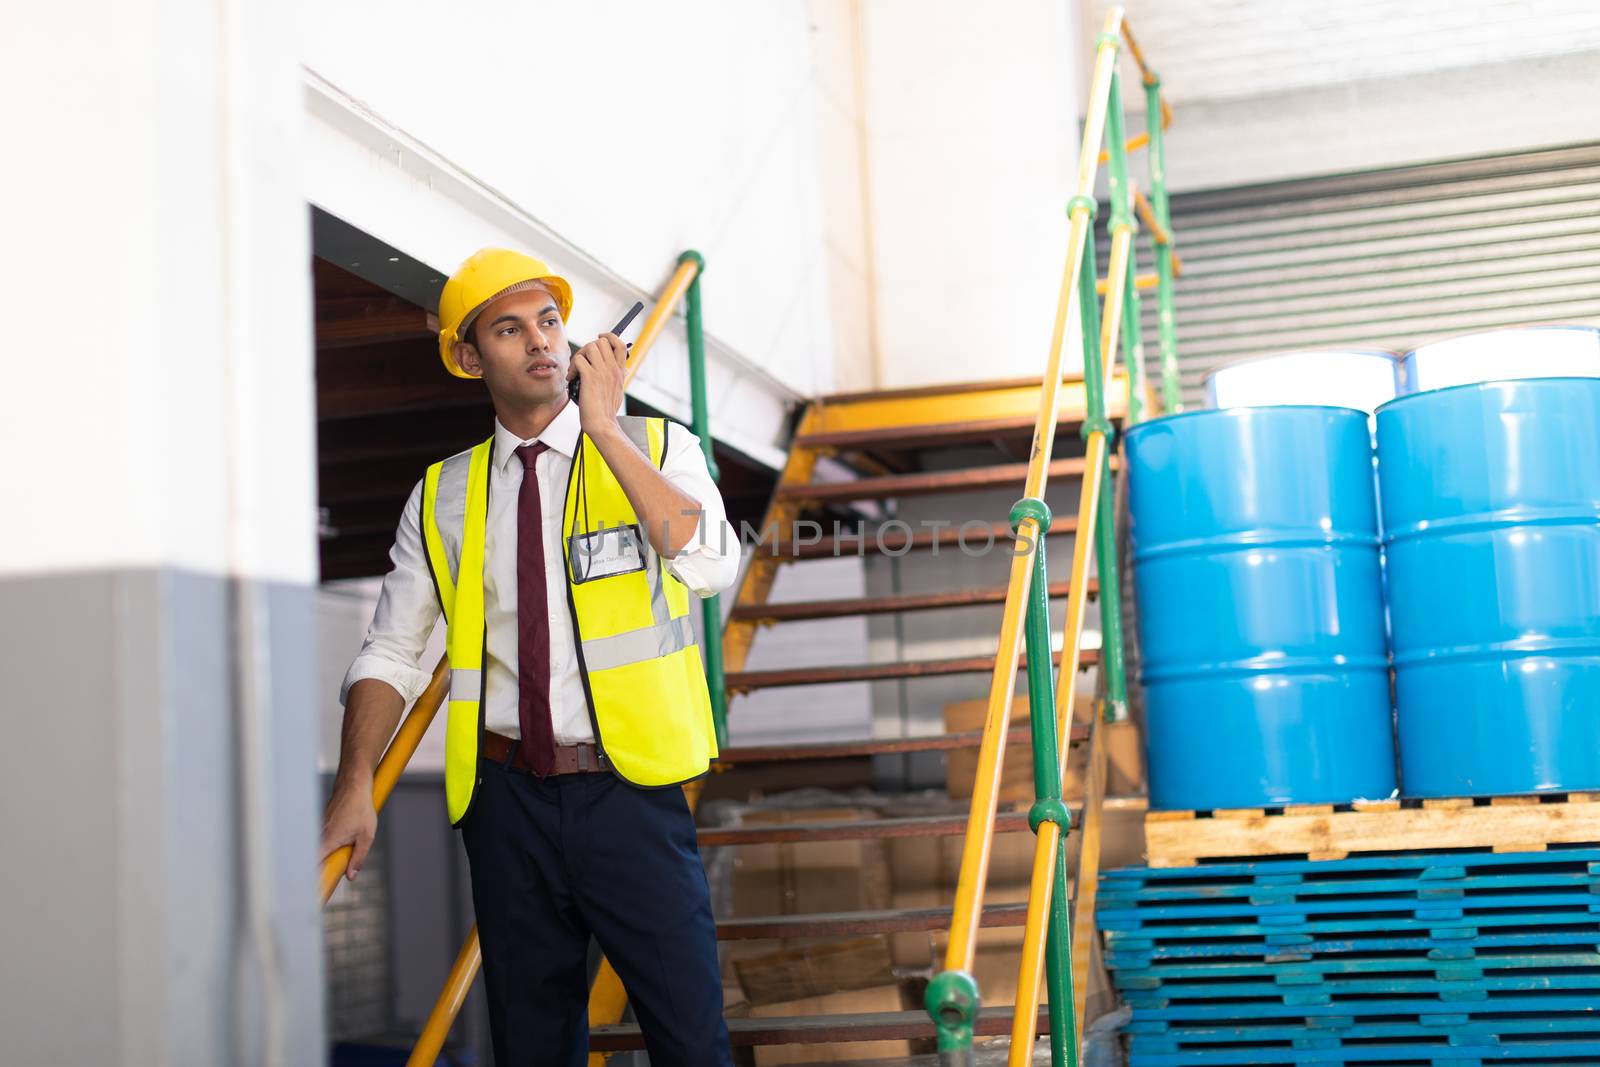 Front view of Caucasian male supervisor talking on talkie walkie on stairs in warehouse. This is a freight transportation and distribution warehouse. Industrial and industrial workers concept